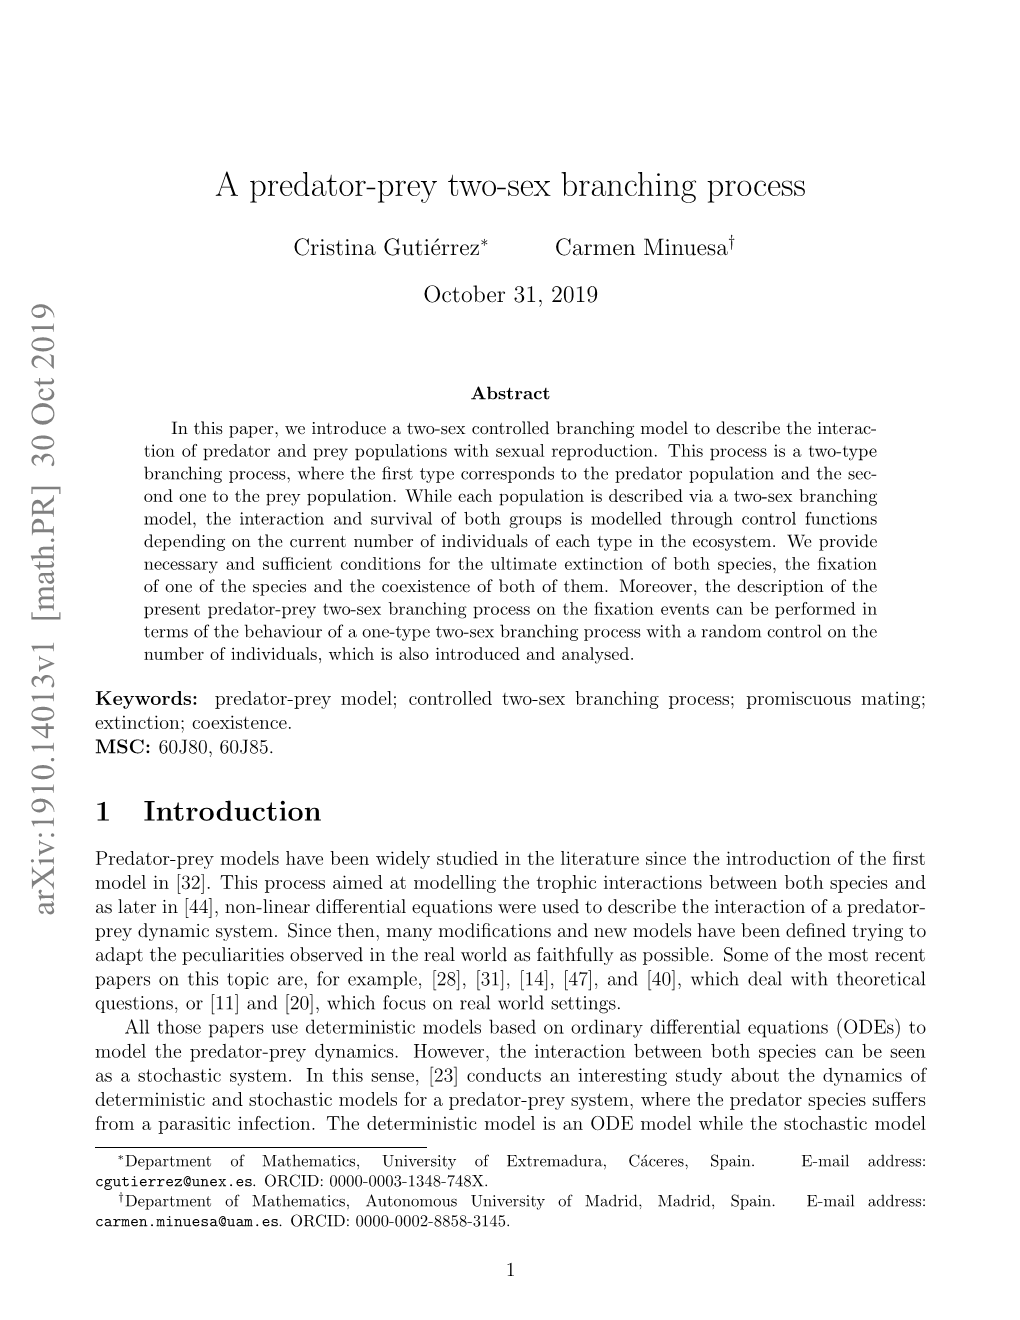 A Predator-Prey Two-Sex Branching Process Is a Bivariate Stochastic Process {(Zn, Zn)}N∈N0 De- ﬁned Recursively As